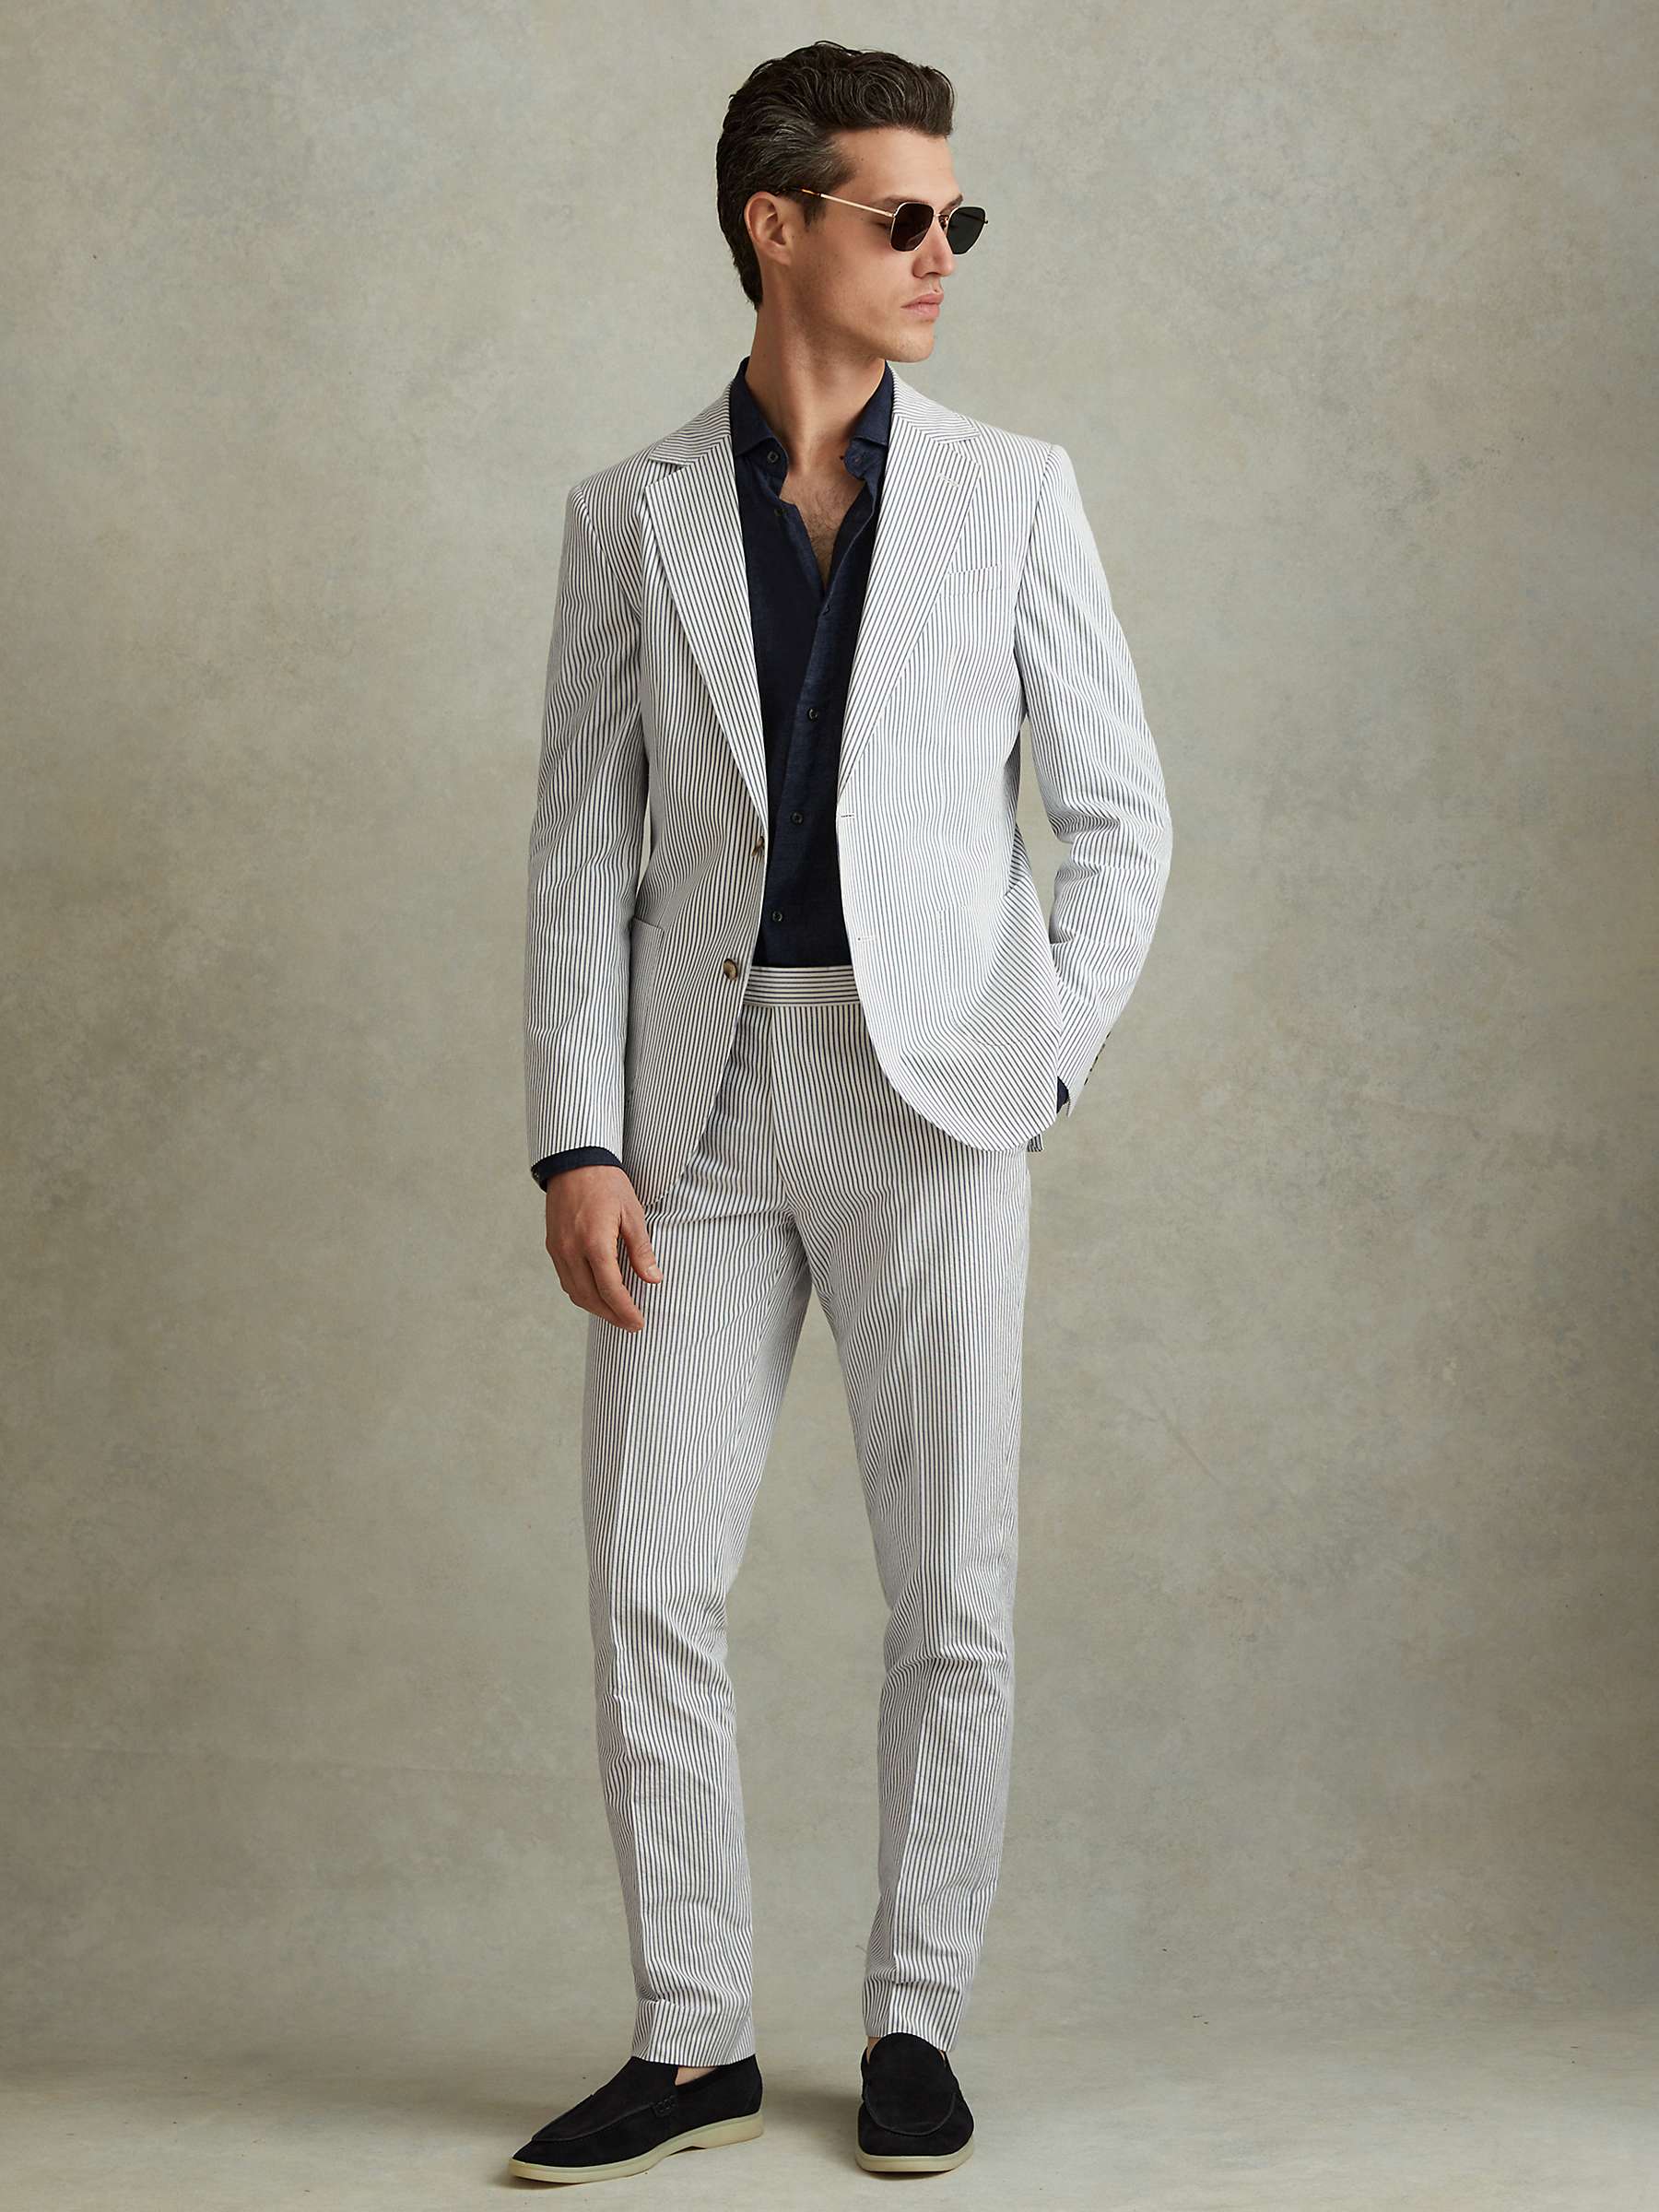 Buy Reiss Barr Tailored Fit Stripe Suit Jacket, Soft Blue/White Online at johnlewis.com